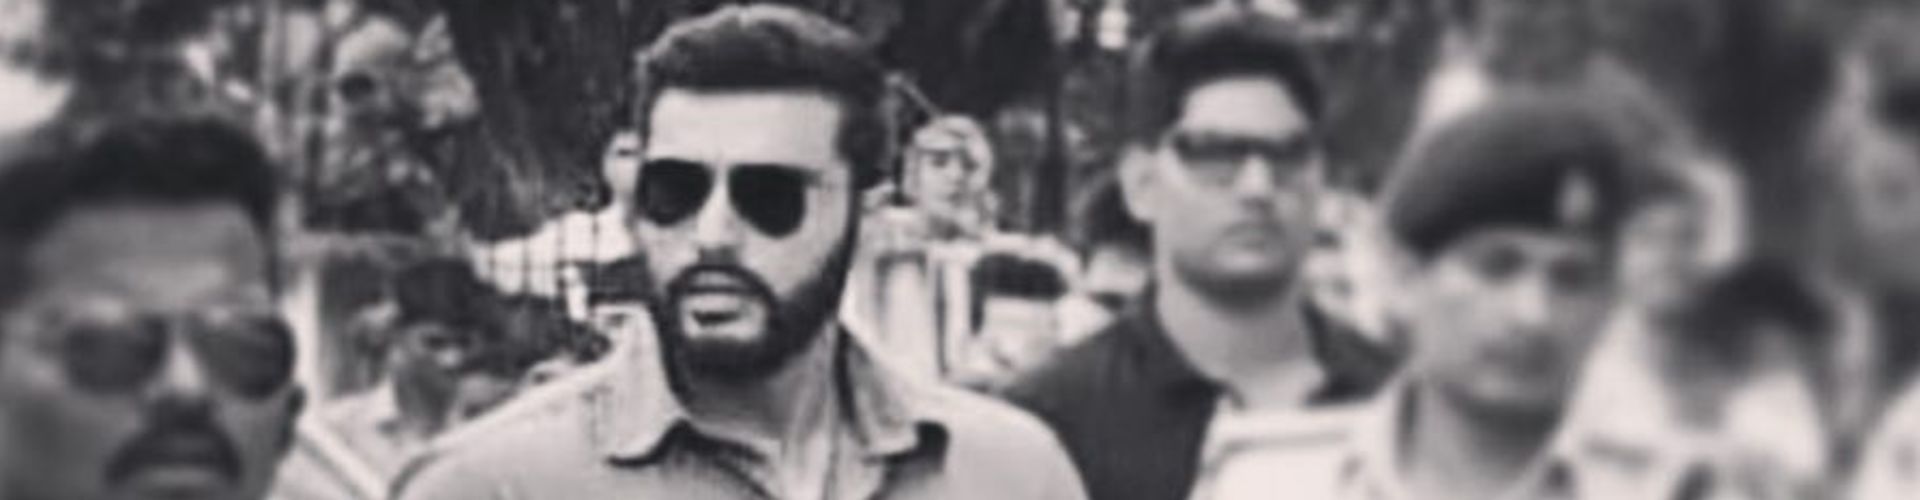 India’s Most Wanted Been Amazing Says Arjun Kapoor